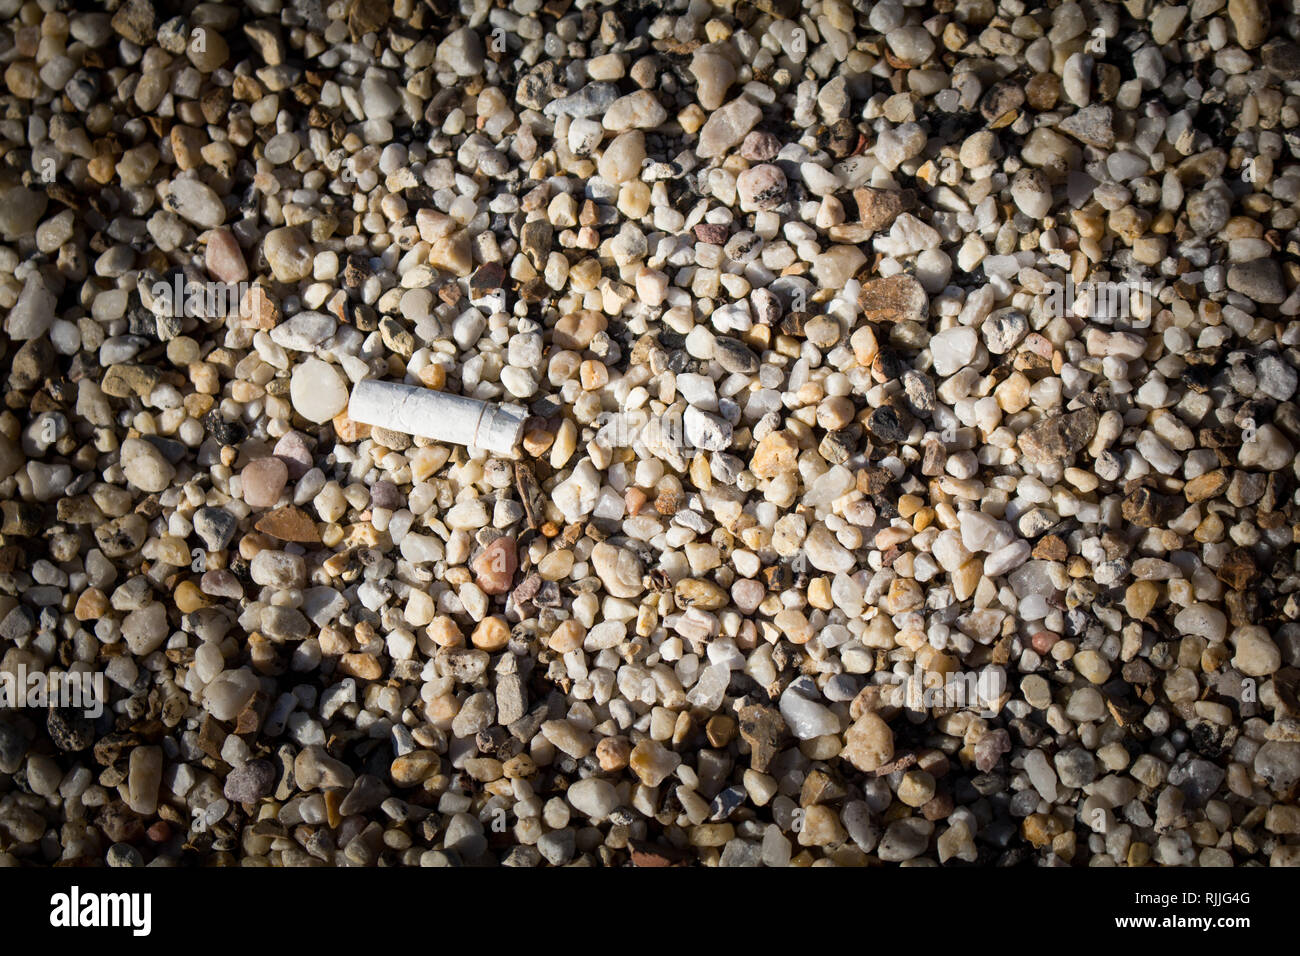 A cigarette discarded on a pebbled ground. Stock Photo